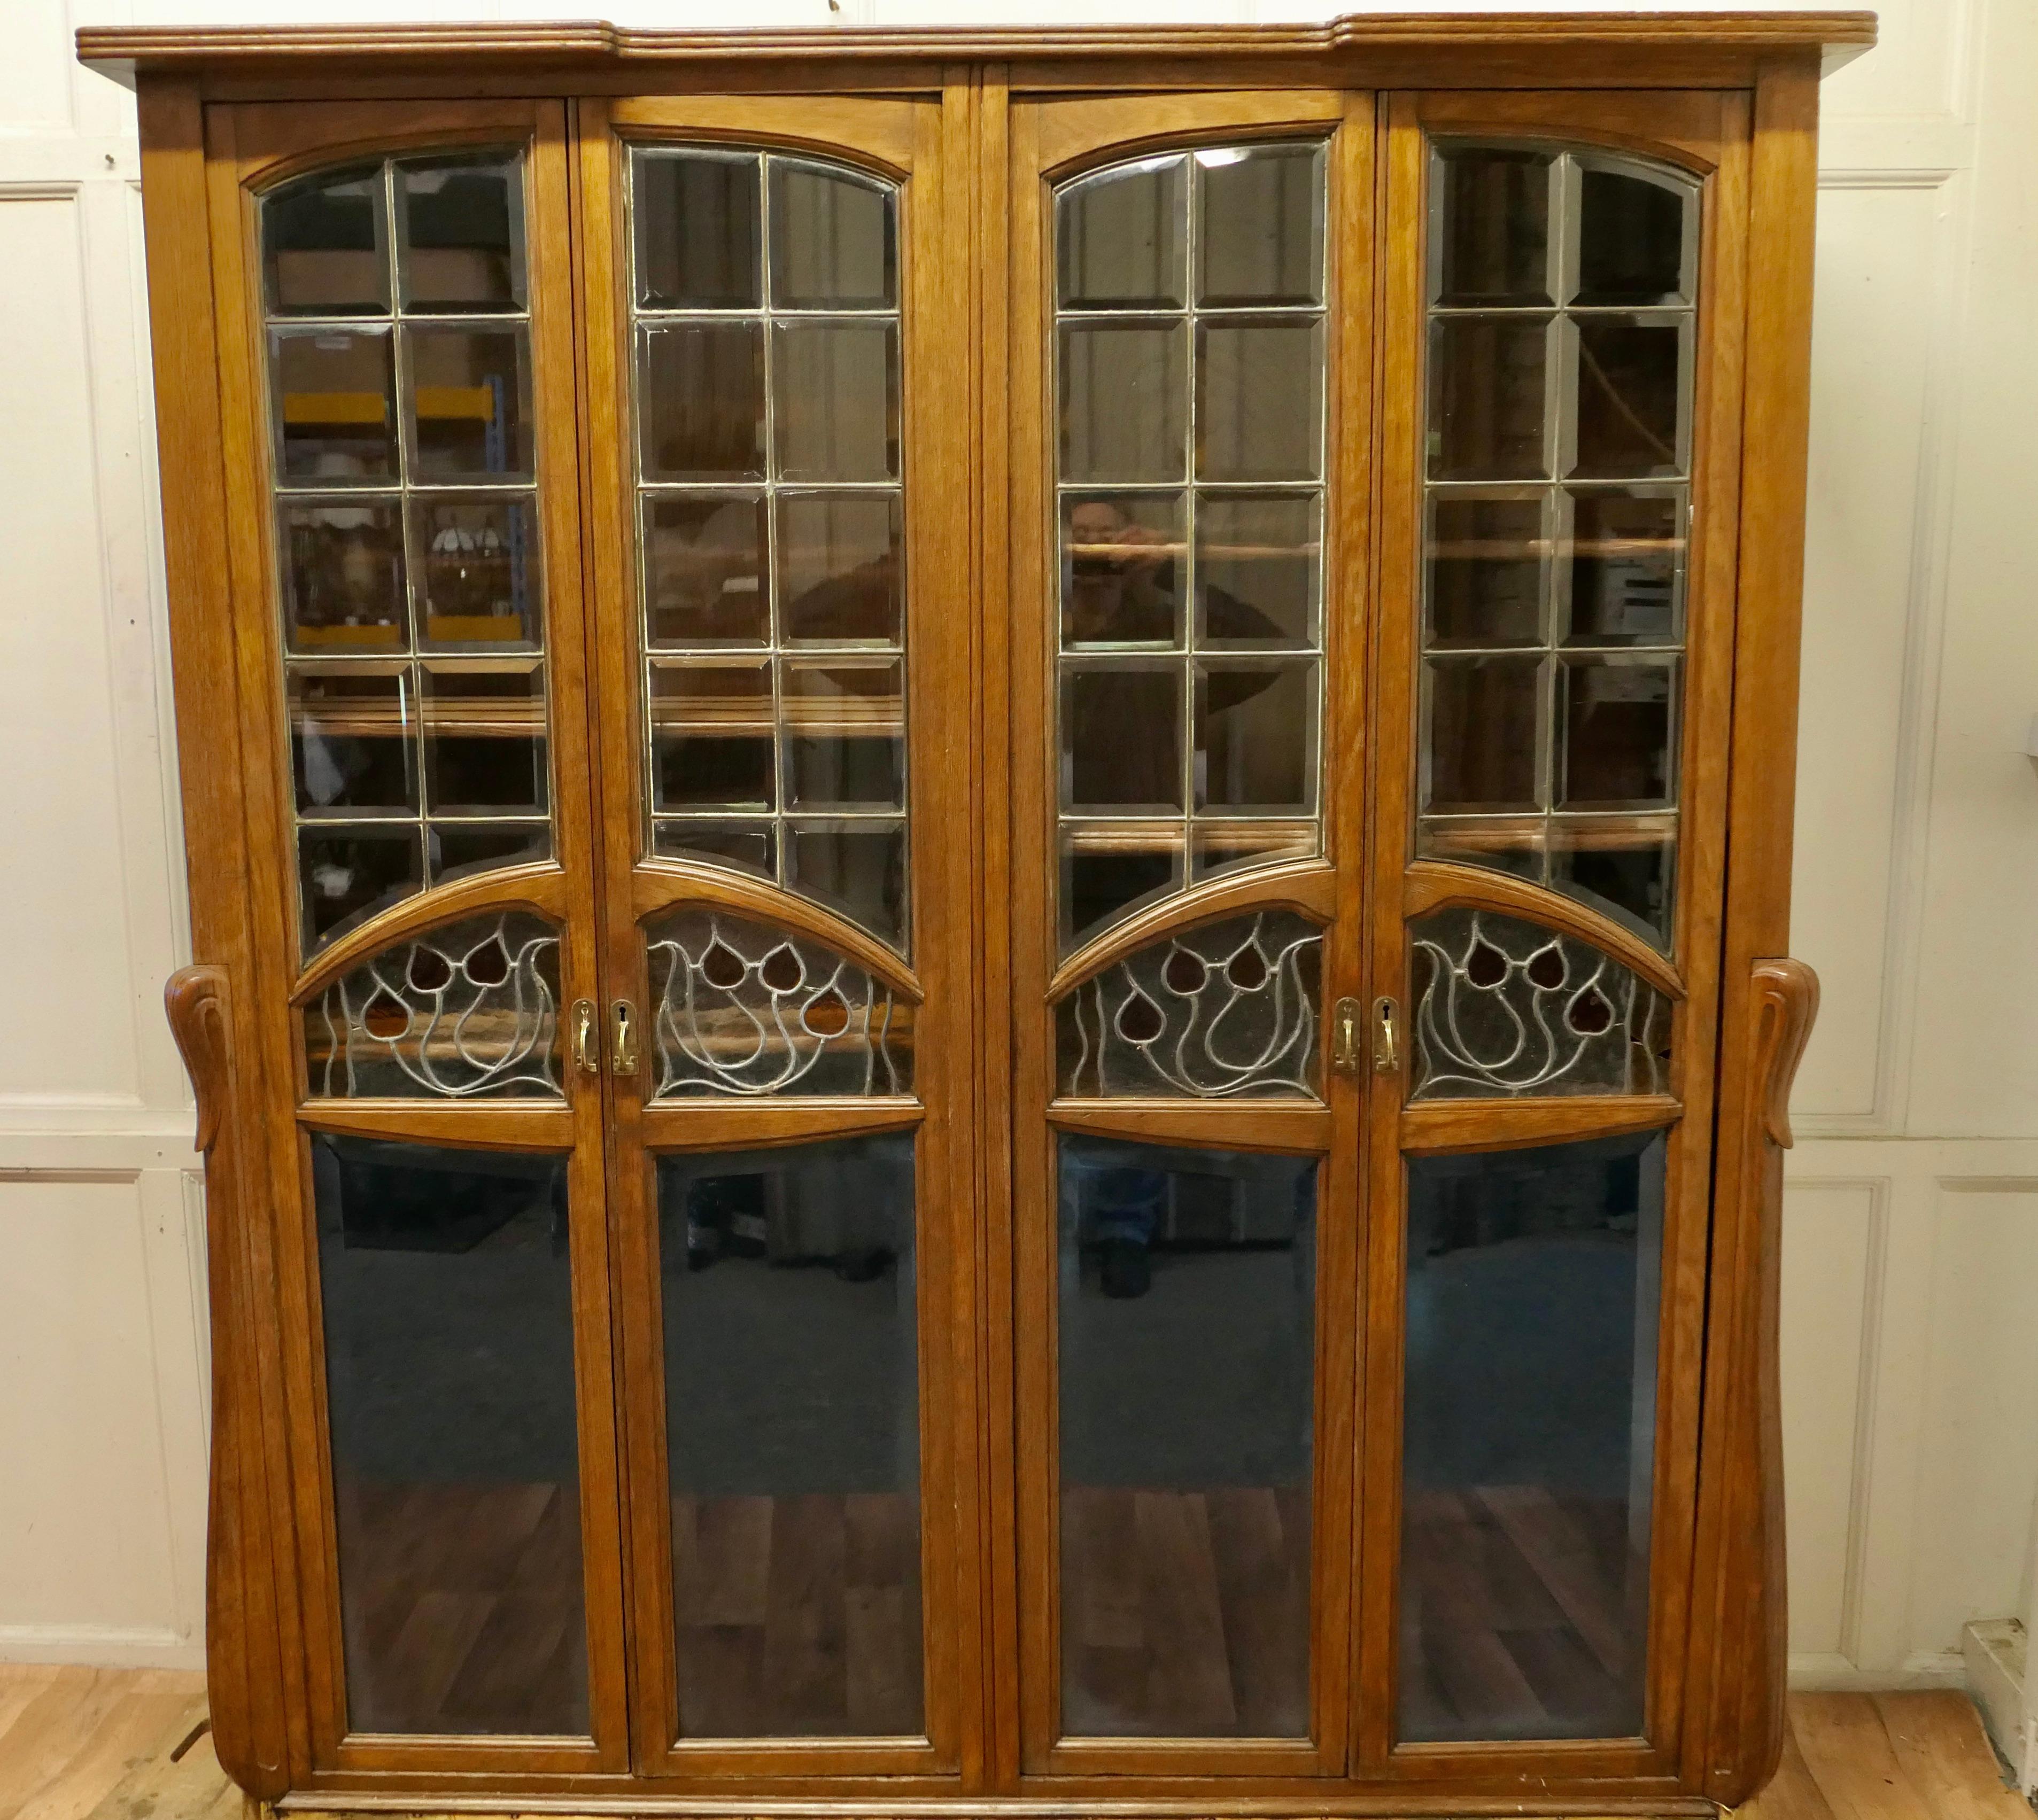 A Rare Piece of Progressive Arts and Crafts furniture, in golden oak and stained glass

This Large Bookcase has a remarkable and stylish design, typical of the late Victorian era associated with the Arts and Crafts movement. 
It is inspired in